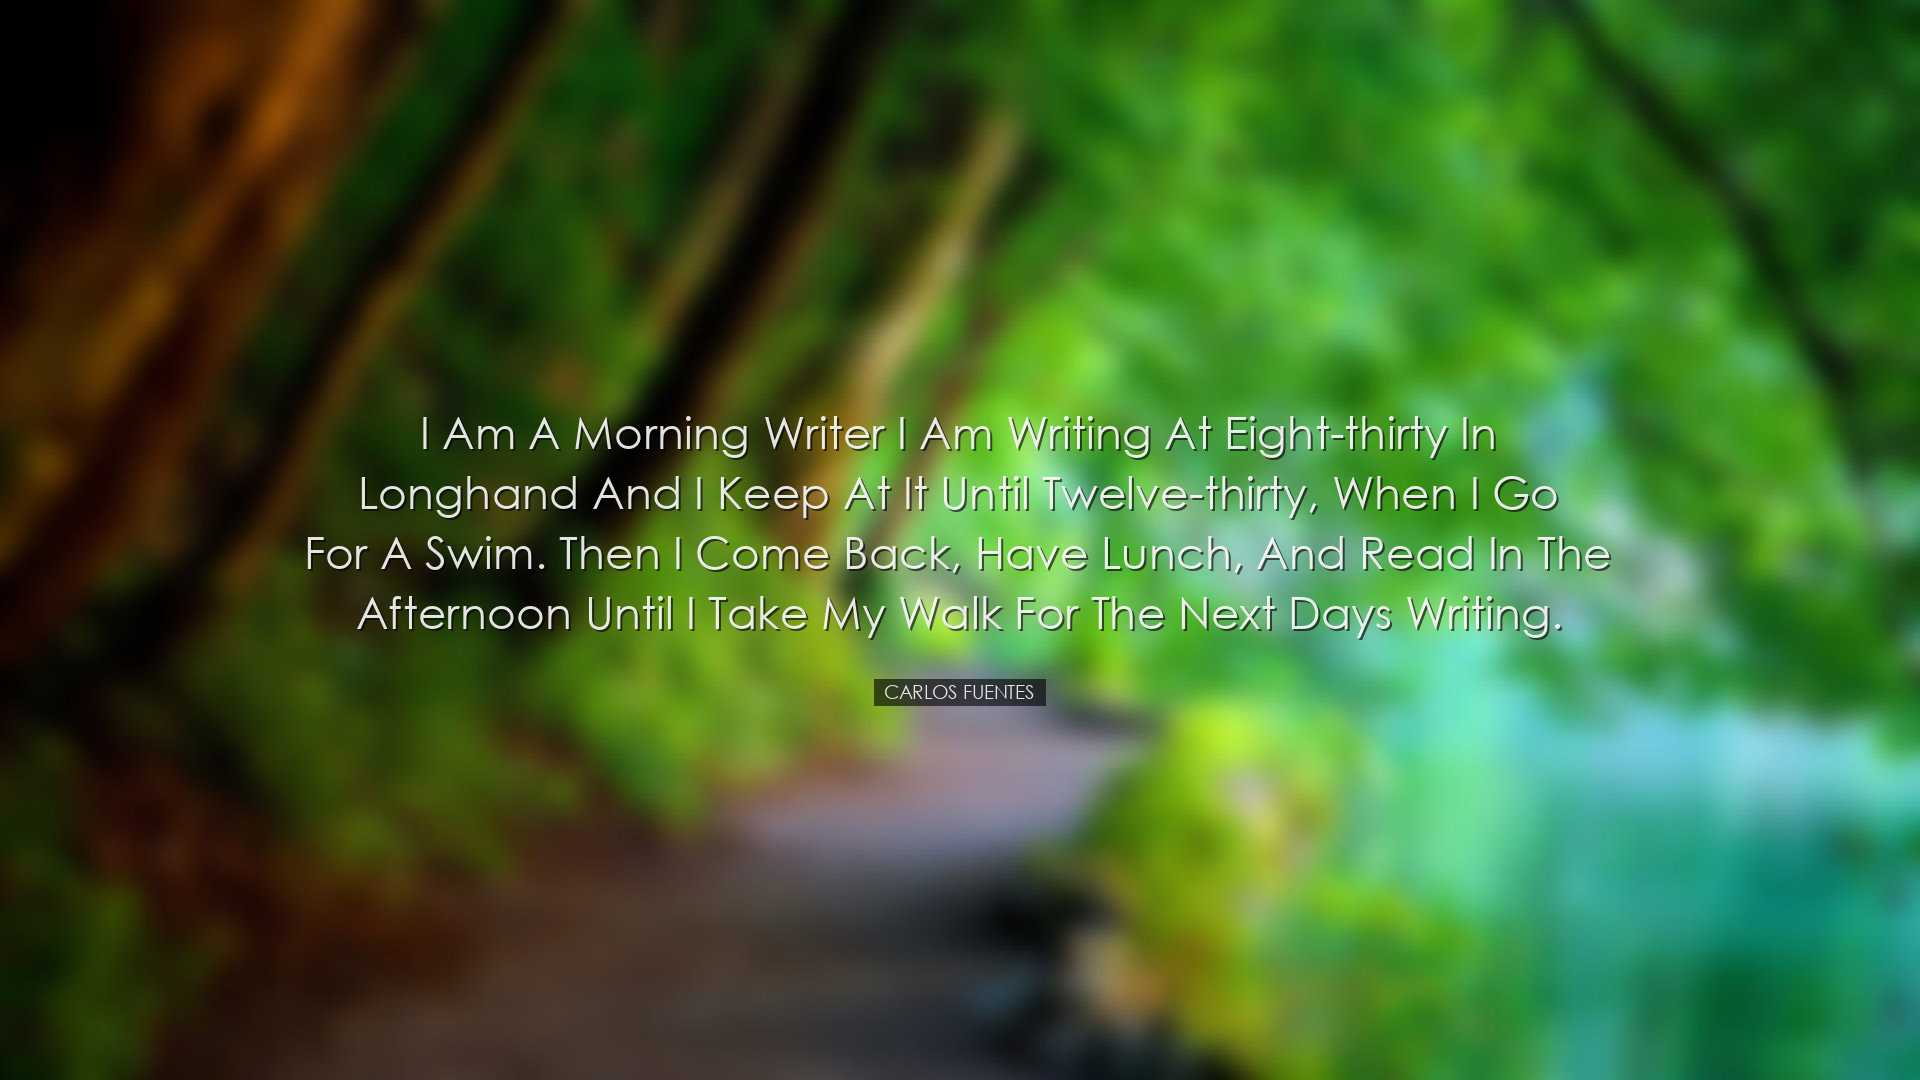 I am a morning writer I am writing at eight-thirty in longhand and